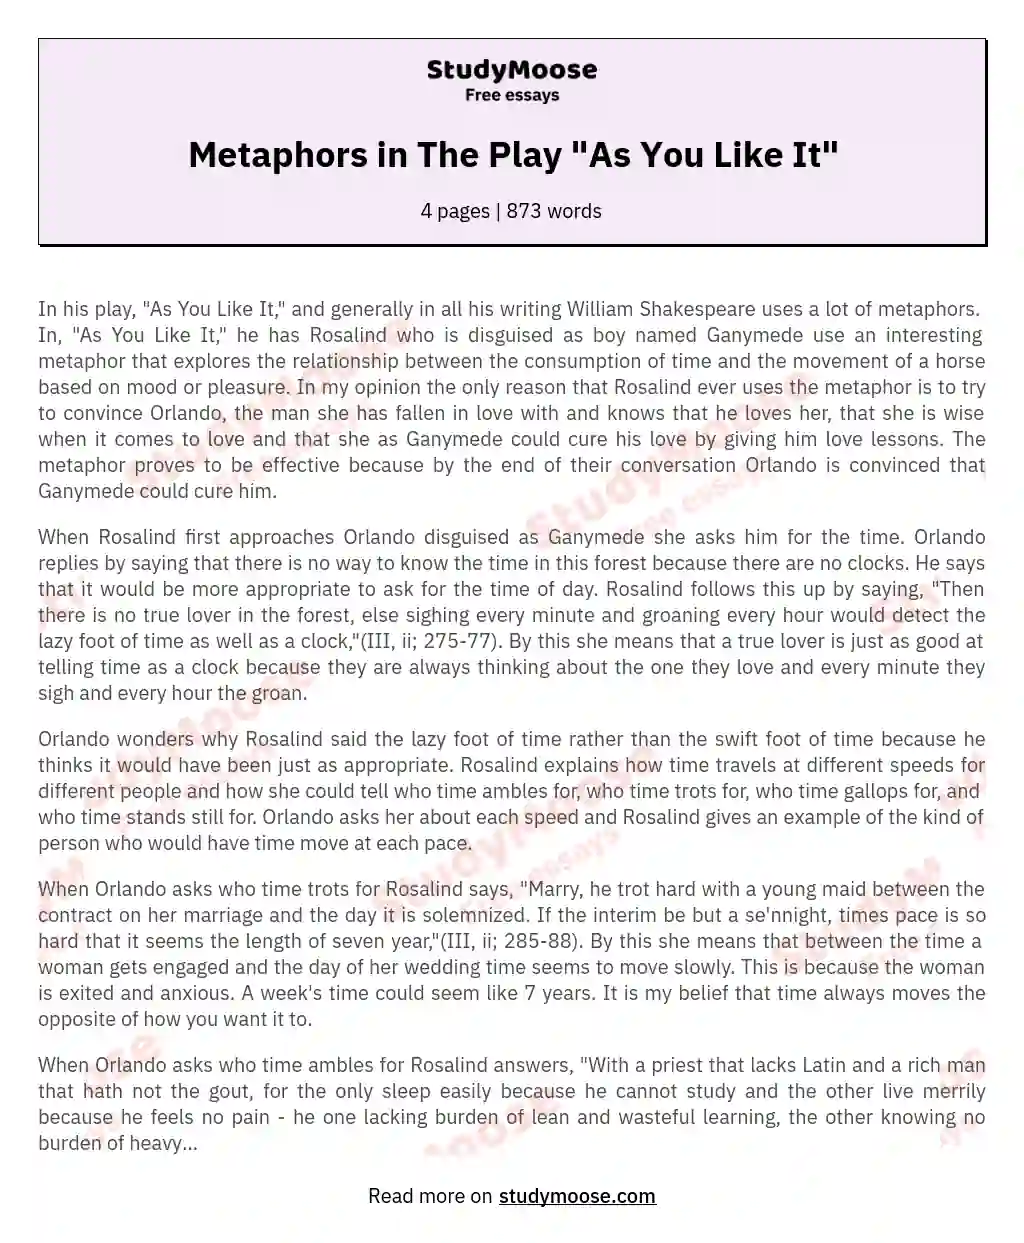 Metaphors in The Play "As You Like It"